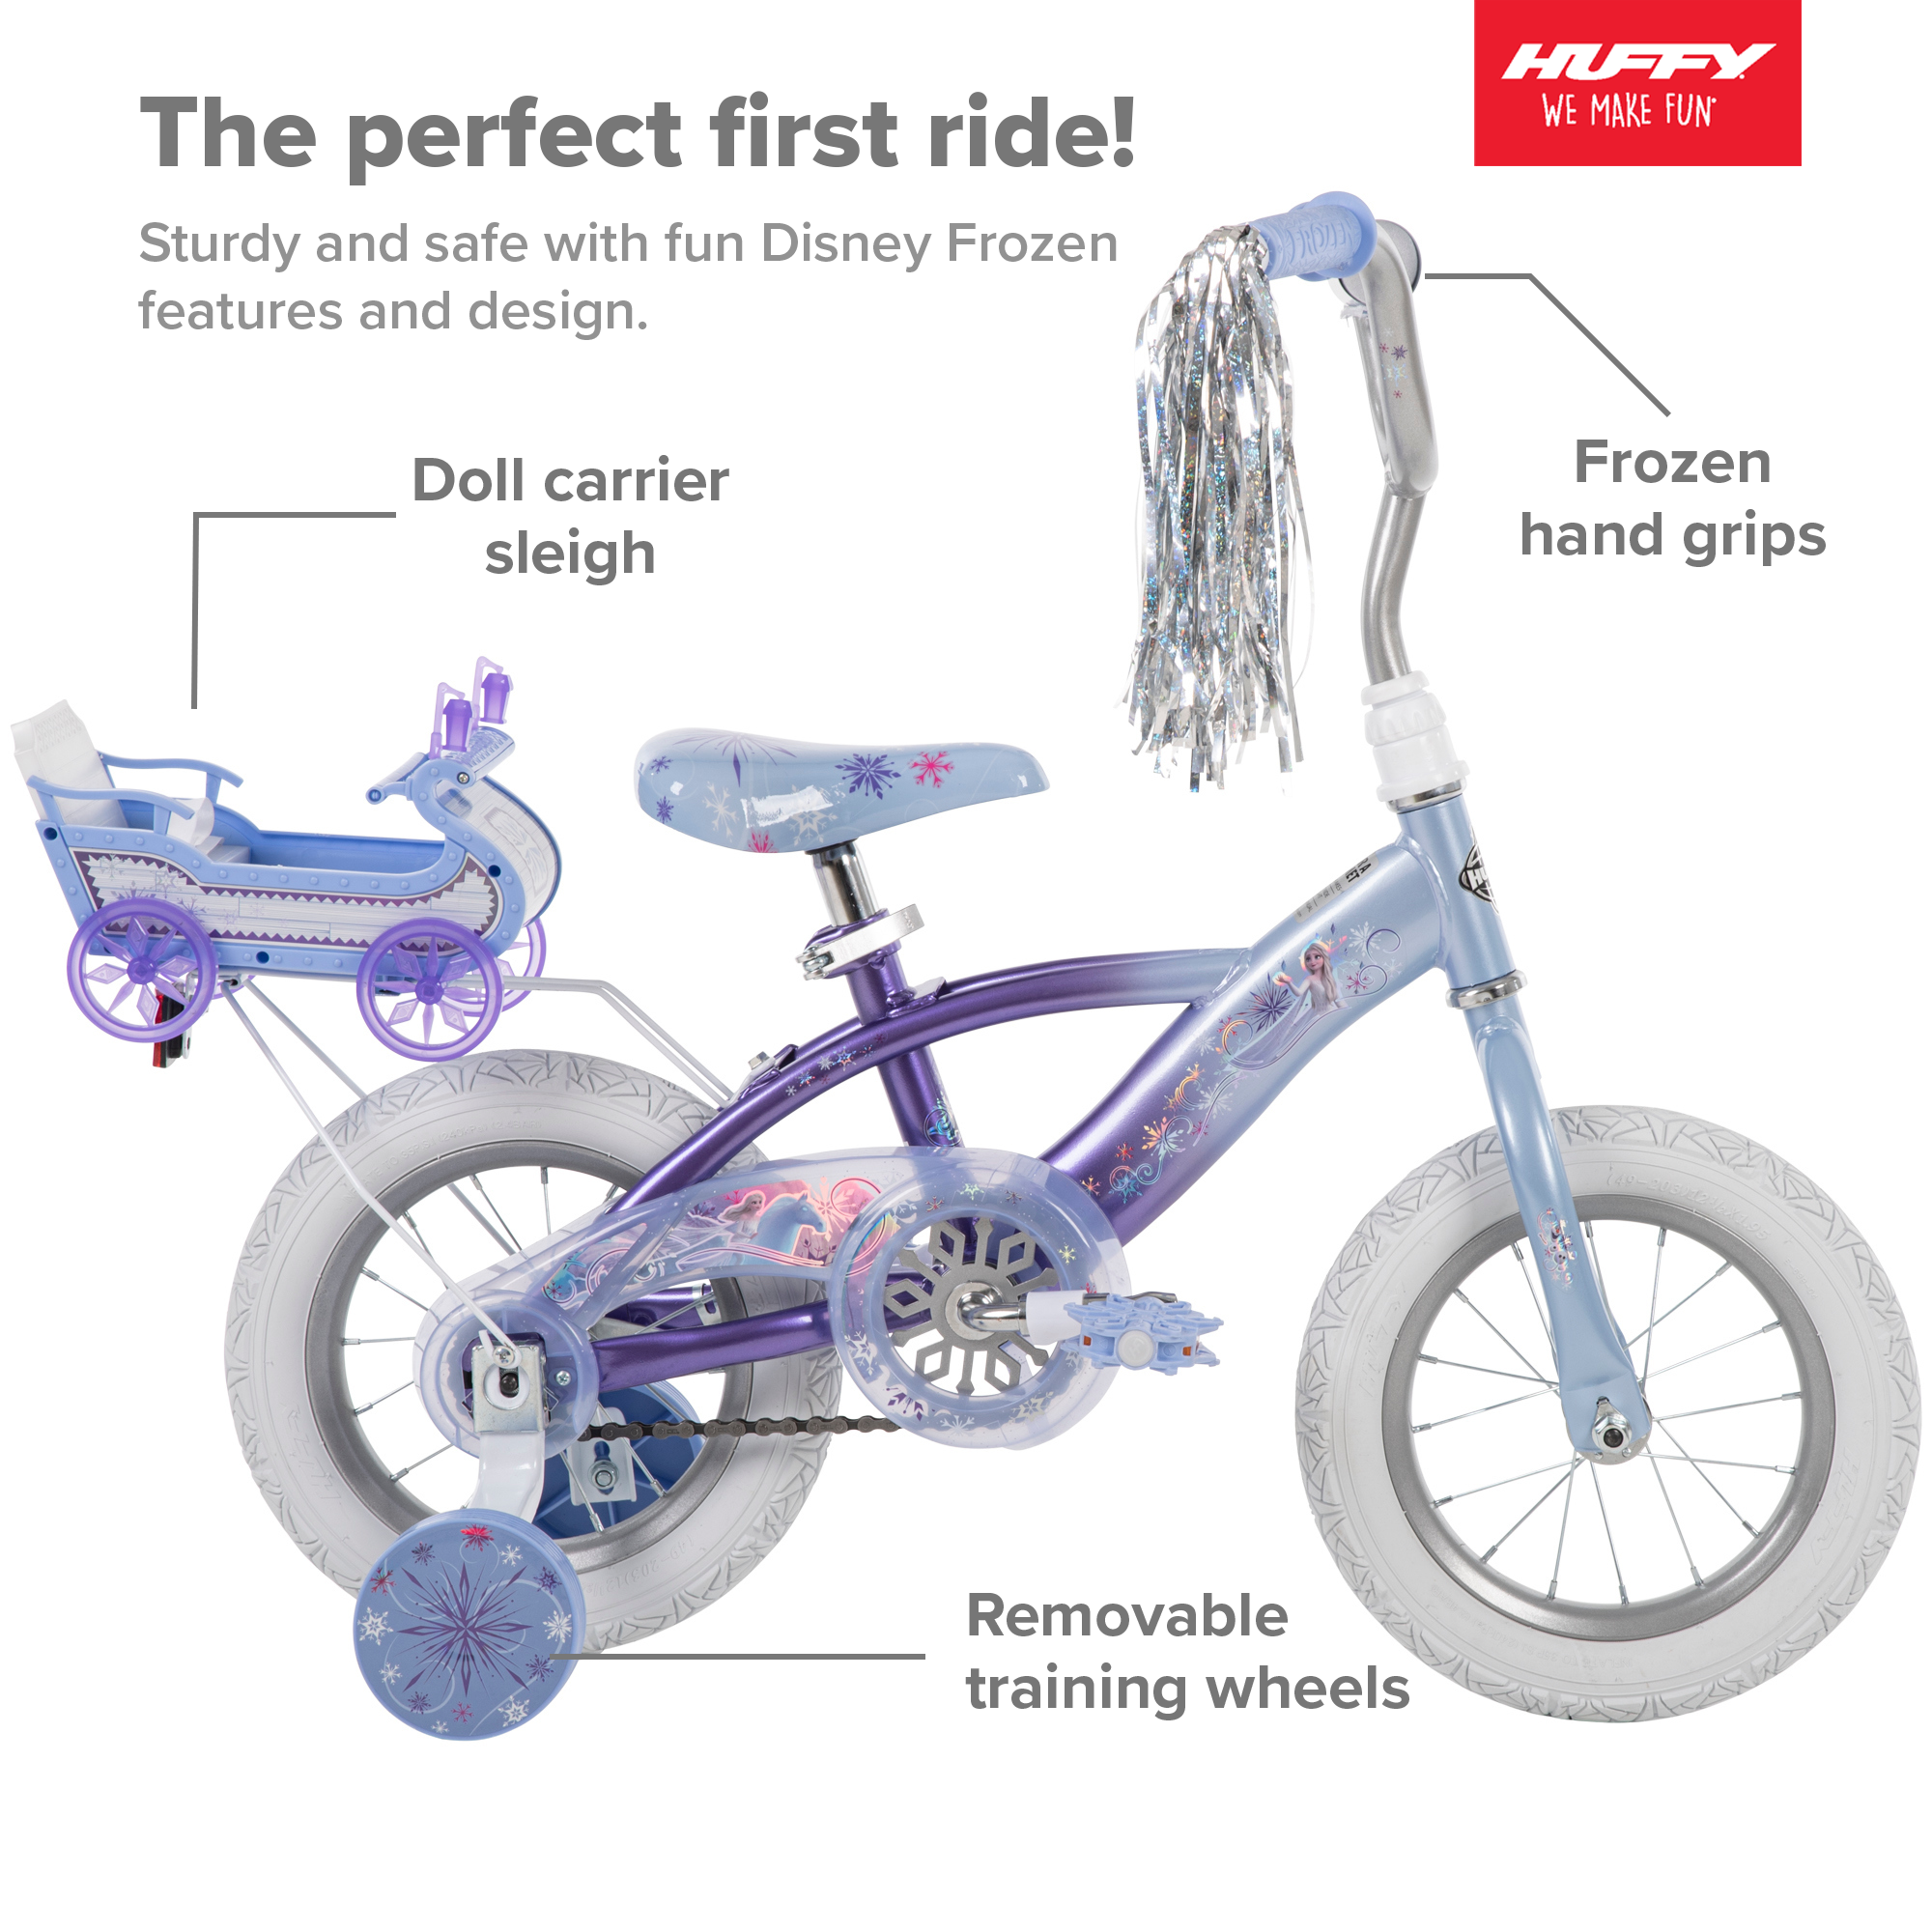 Disney Frozen 12 in. Bike with Doll Carrier Sleigh for Girl's, Ages 2+ Years, White and Purple by Huffy - image 3 of 19